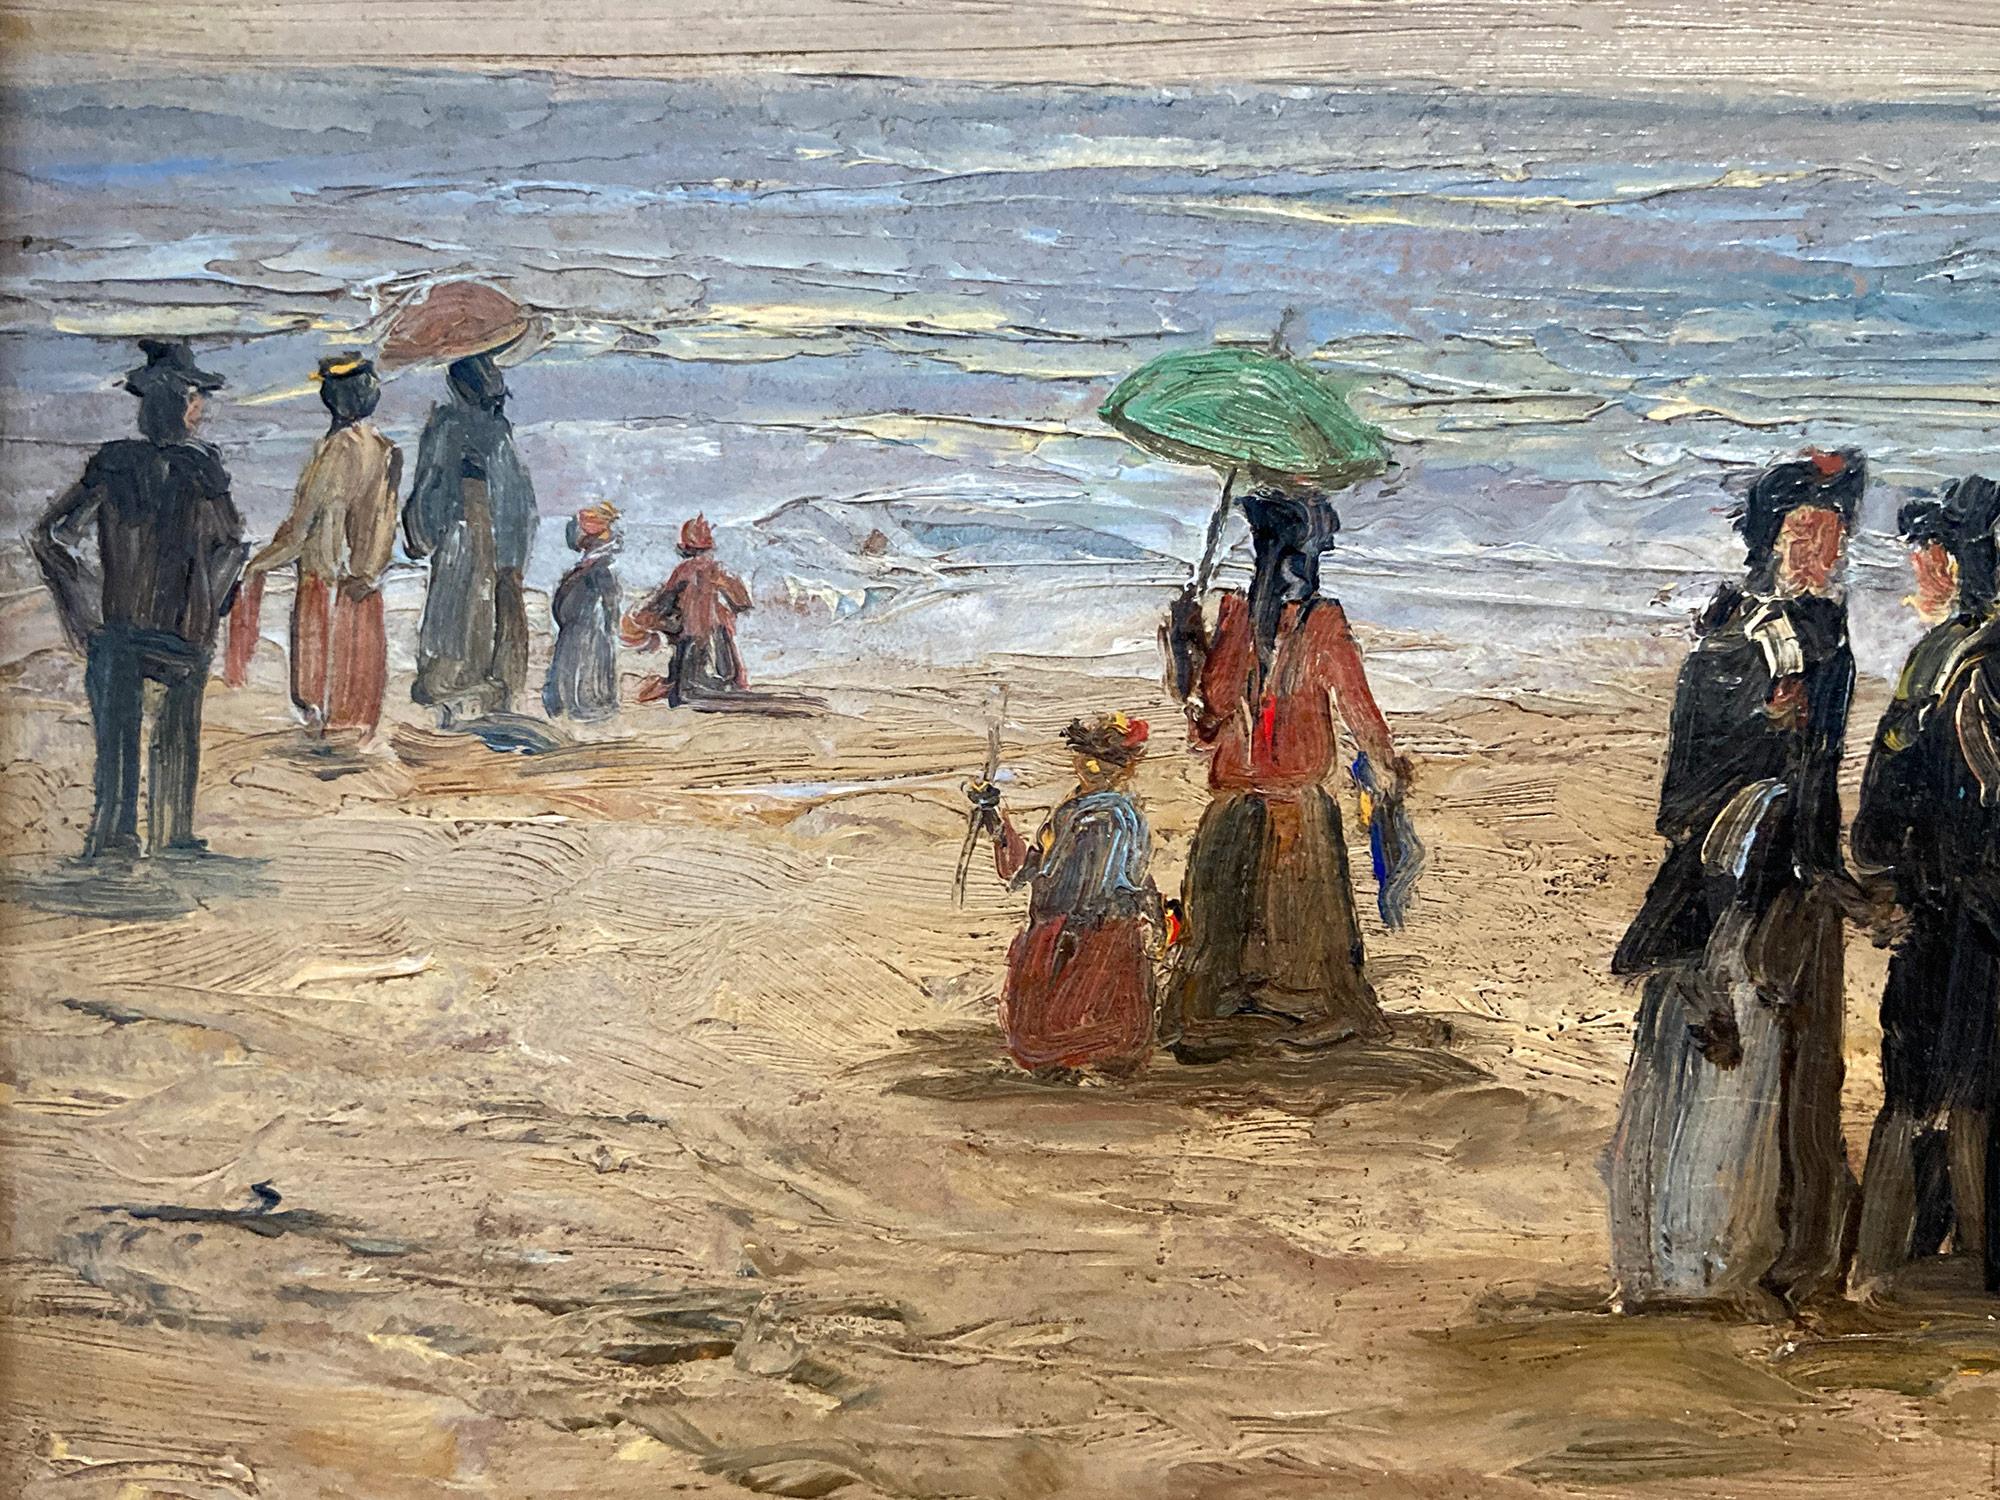 A wonderfully rich beach scene done in the Early 20th Century depicting figures in the sand with sailing boats in the distance along the Normandy coast. The details are greatly admired as the artist was truly a great impressionist painter in the